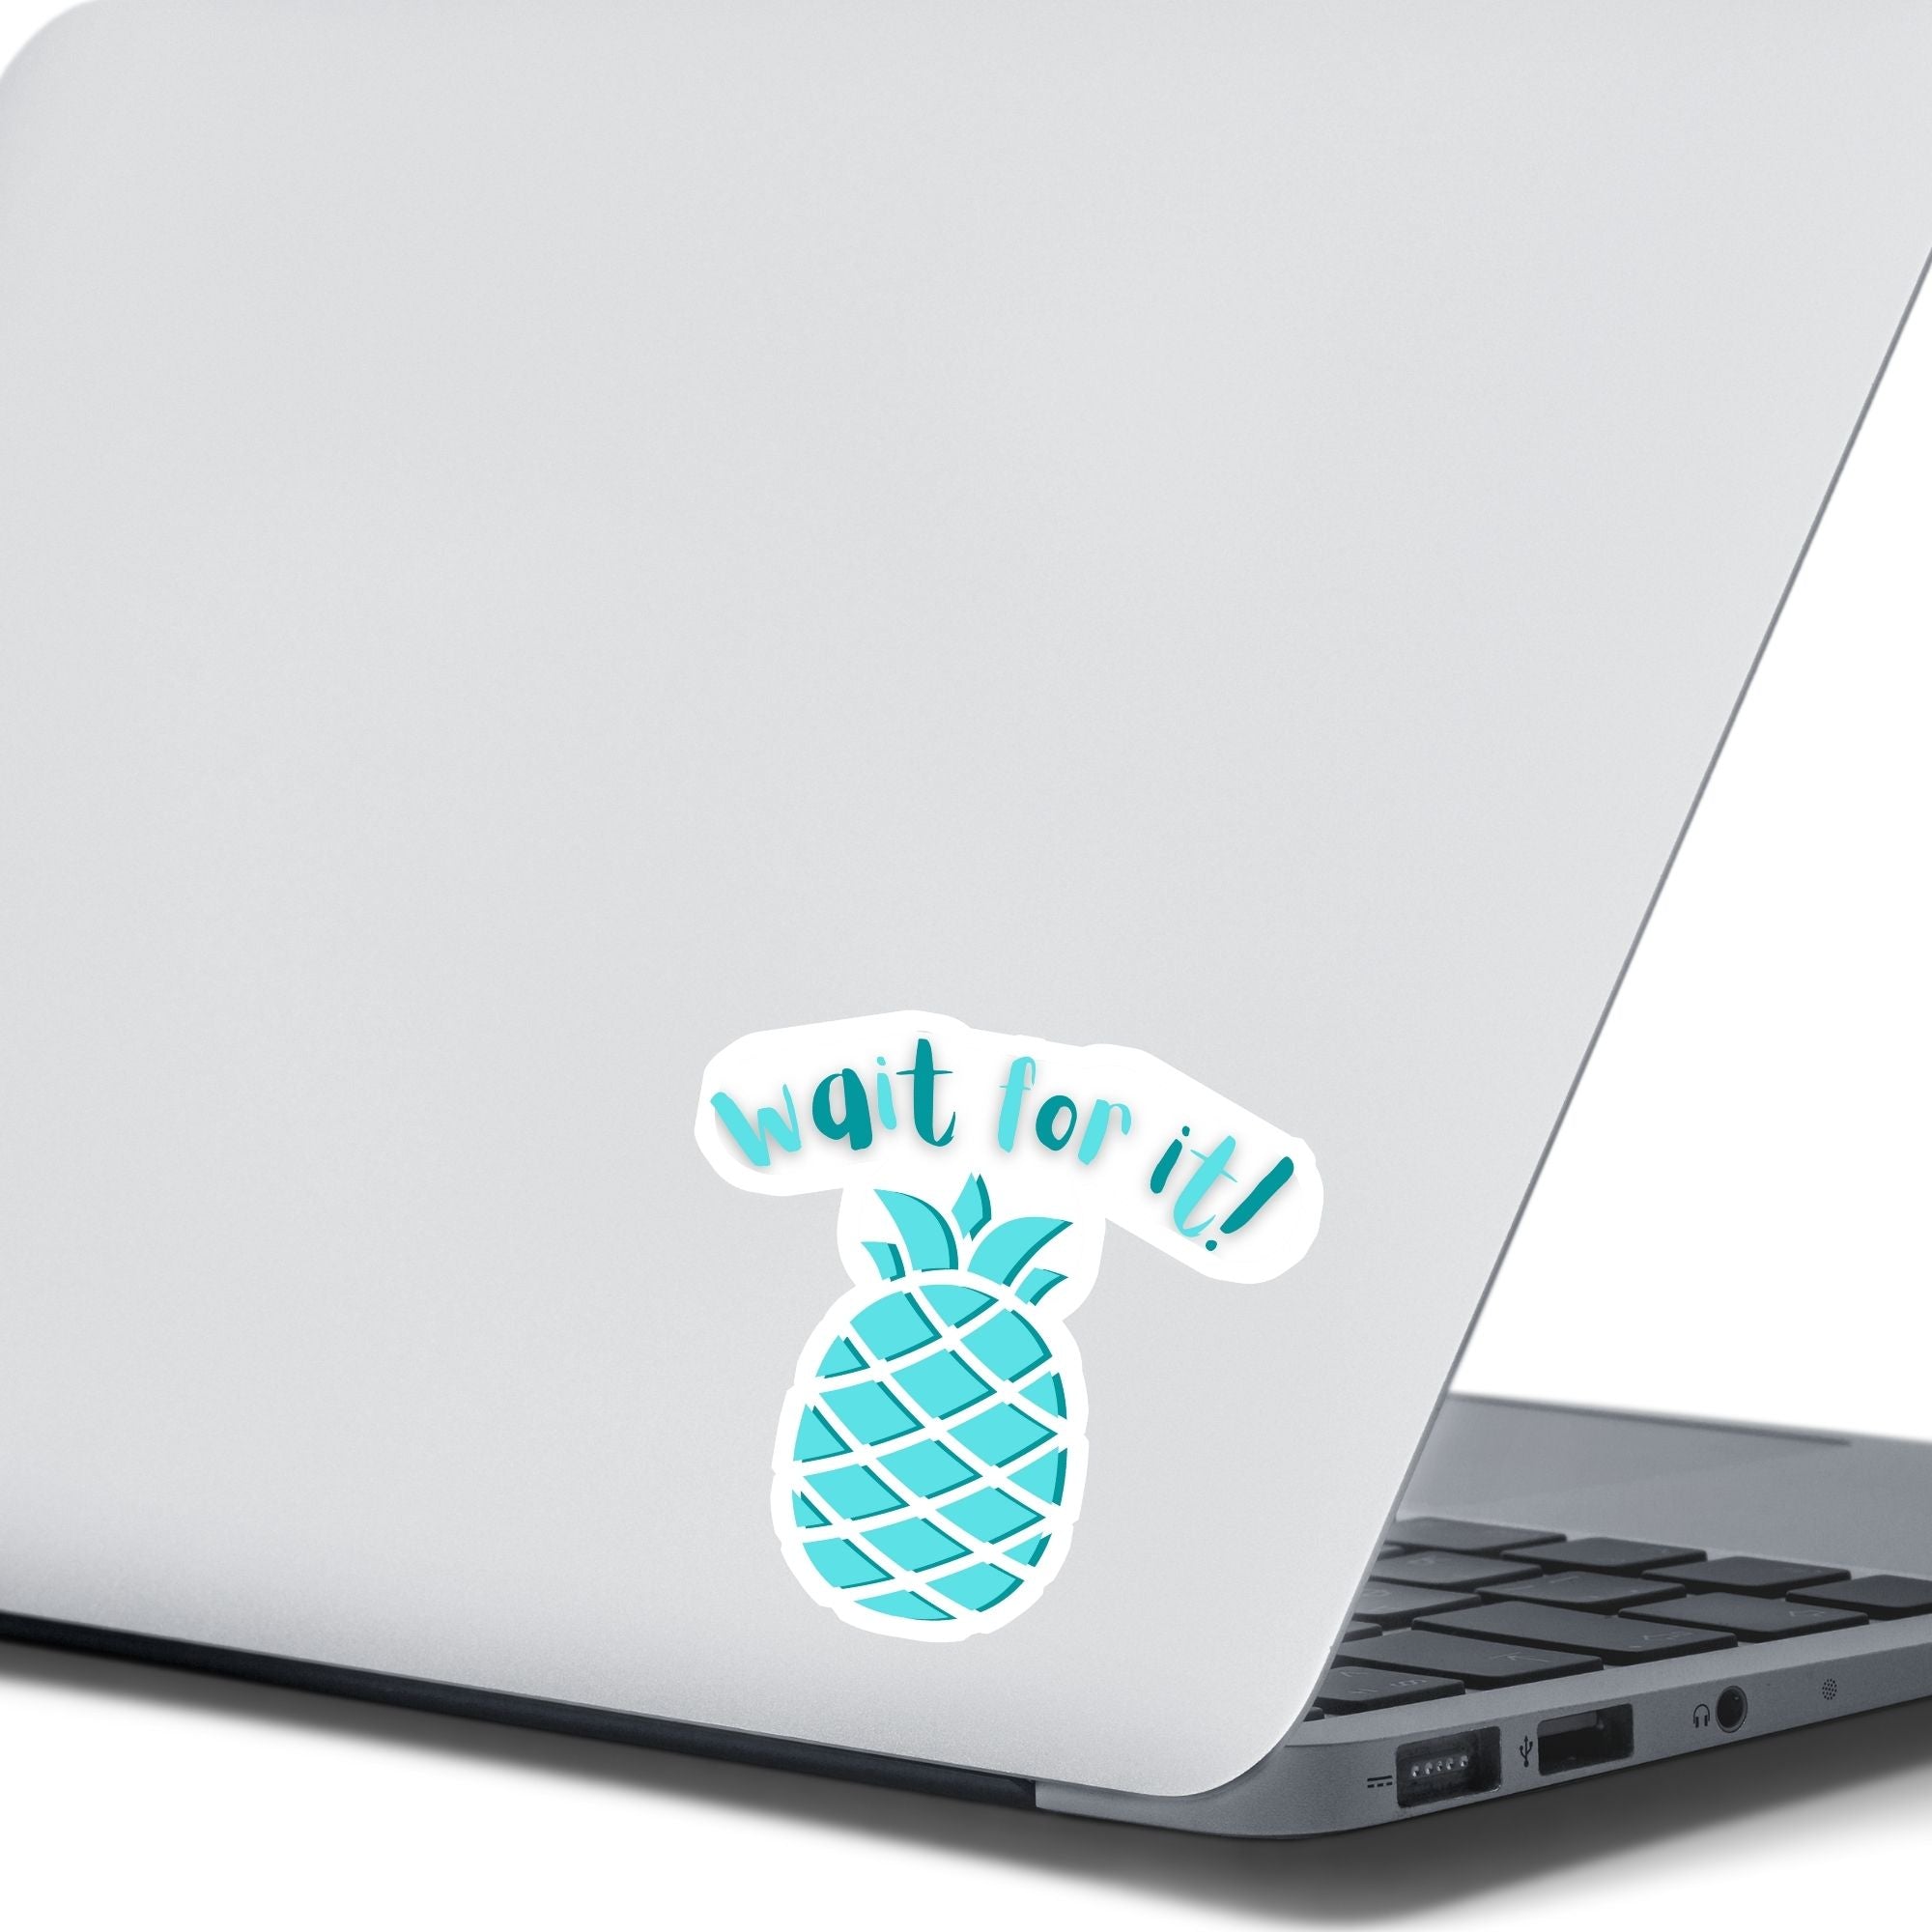 Don't get psyched out by this individual die-cut sticker! It features a teal blue pineapple with the words "Wait for it!" above. This image shows the Wait for it! sticker on the back of an open laptop.